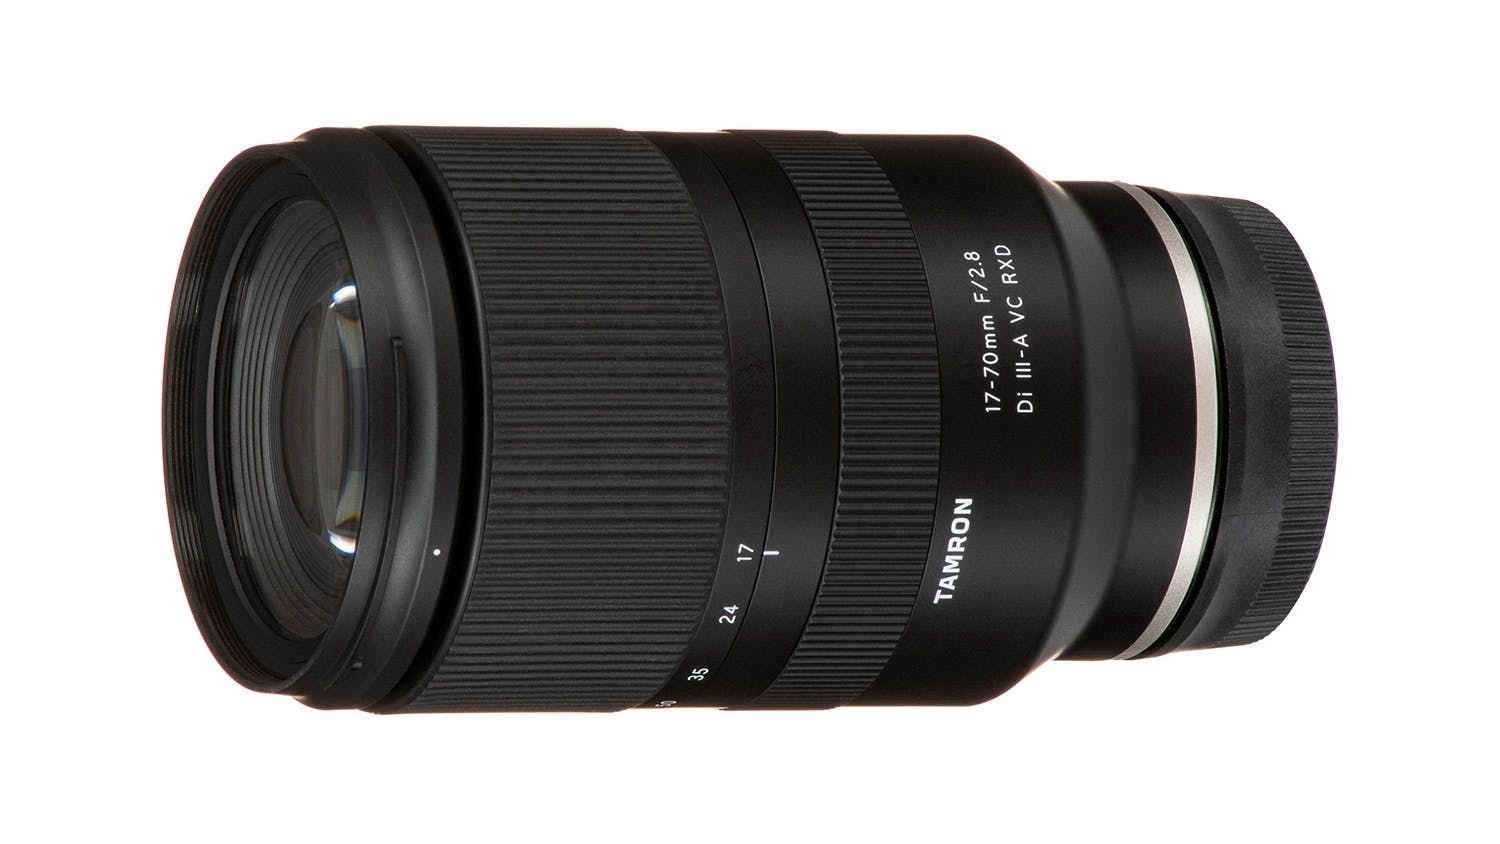 Review: Tamron 17-70mm F2.8 Di III-A VC RXD - Focus Review